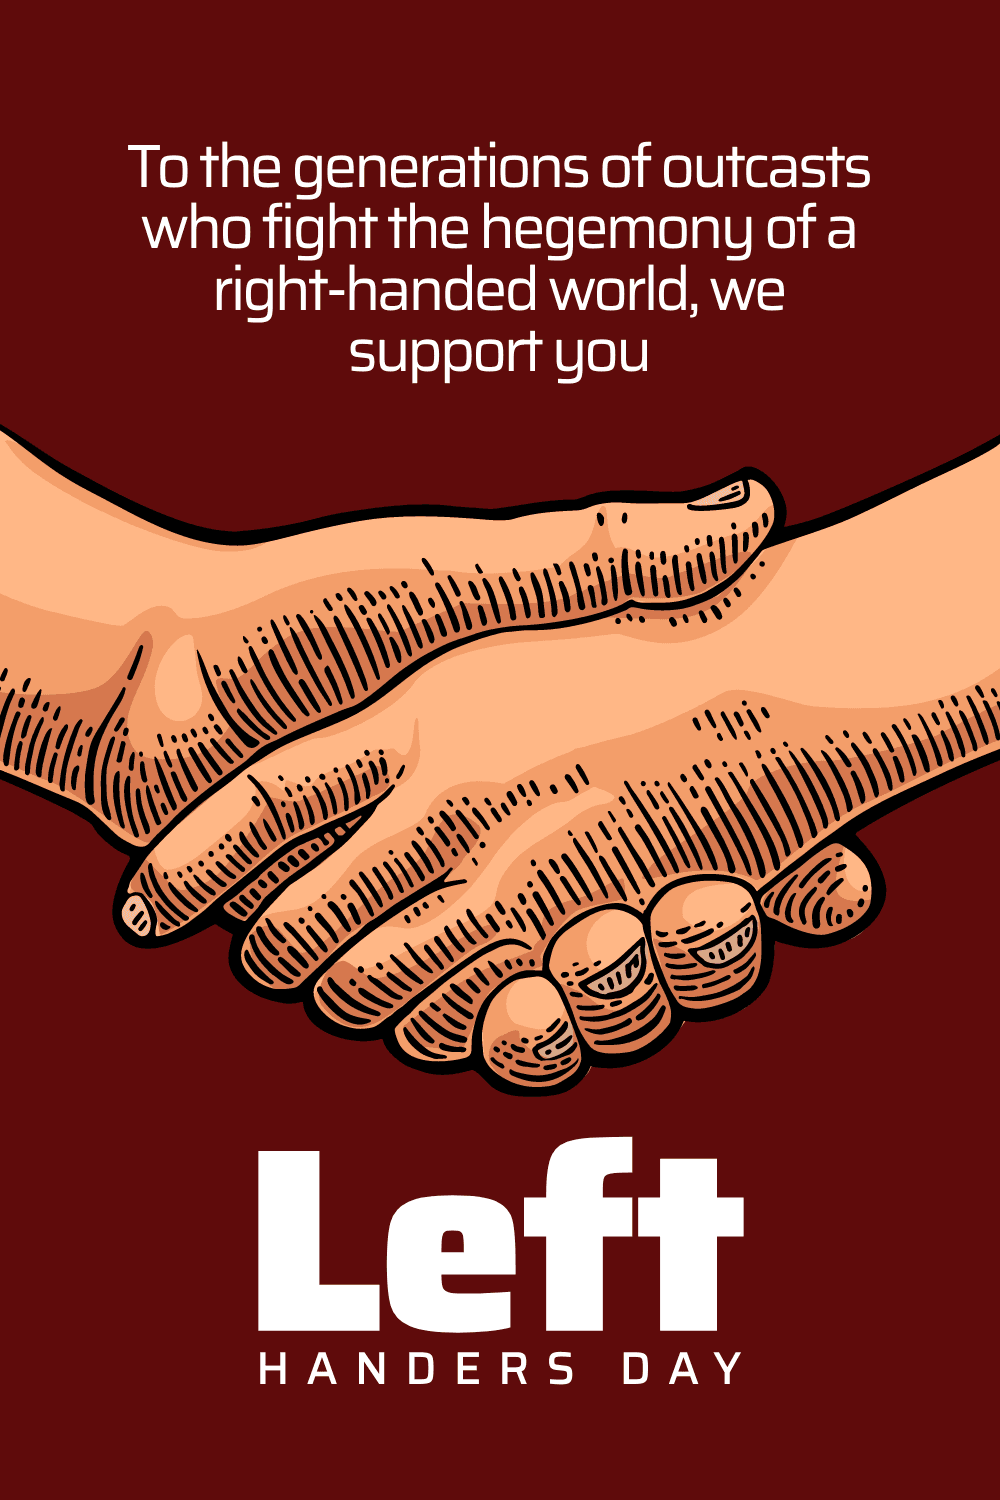 quote-themed-left-handers-day-pinterest-pin-template-thumbnail-img